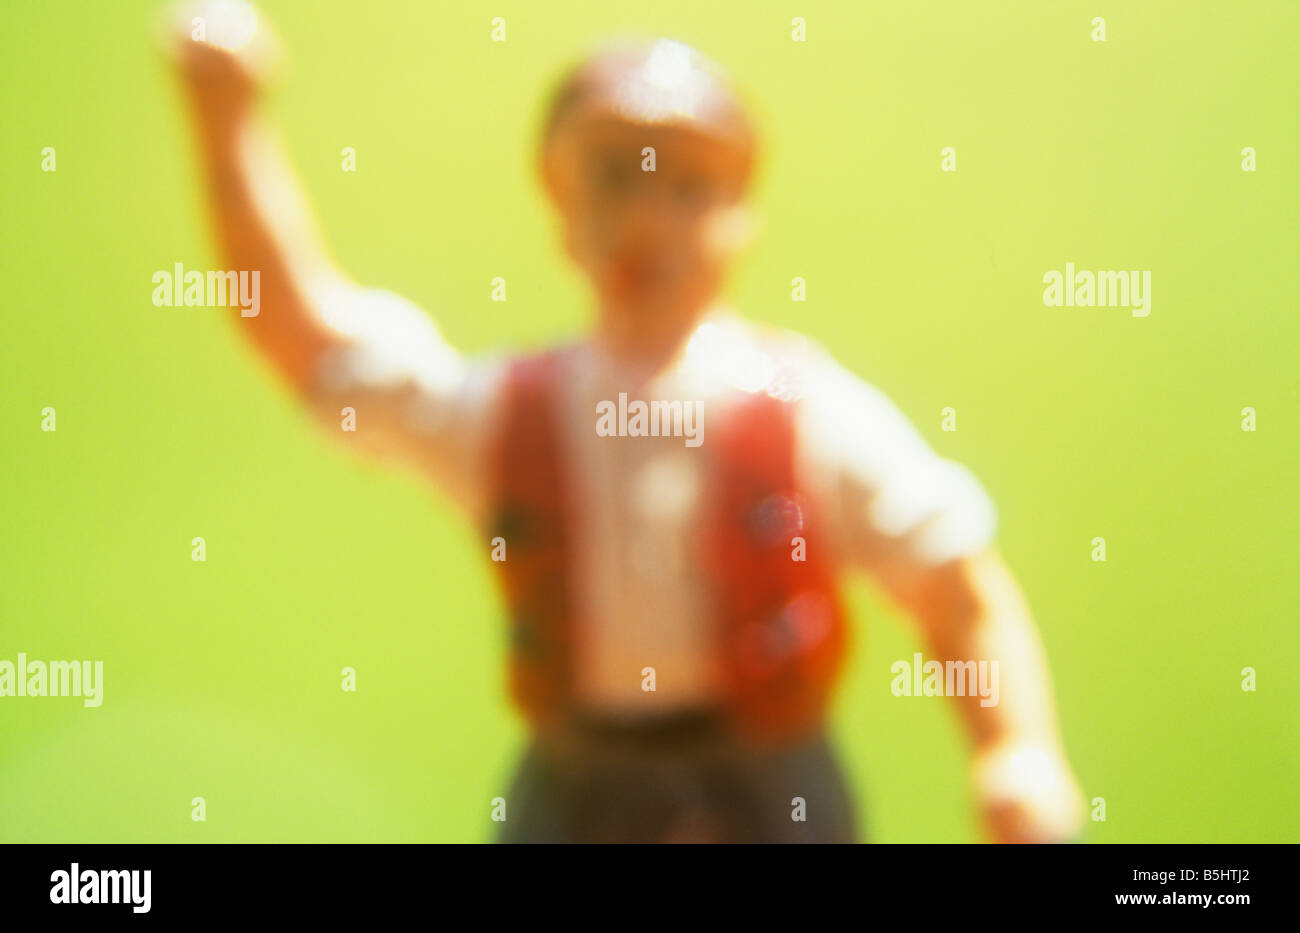 Impressionistic close up of model of farmworker or manual labourer shaking his fist and shouting angrily with grass behind Stock Photo